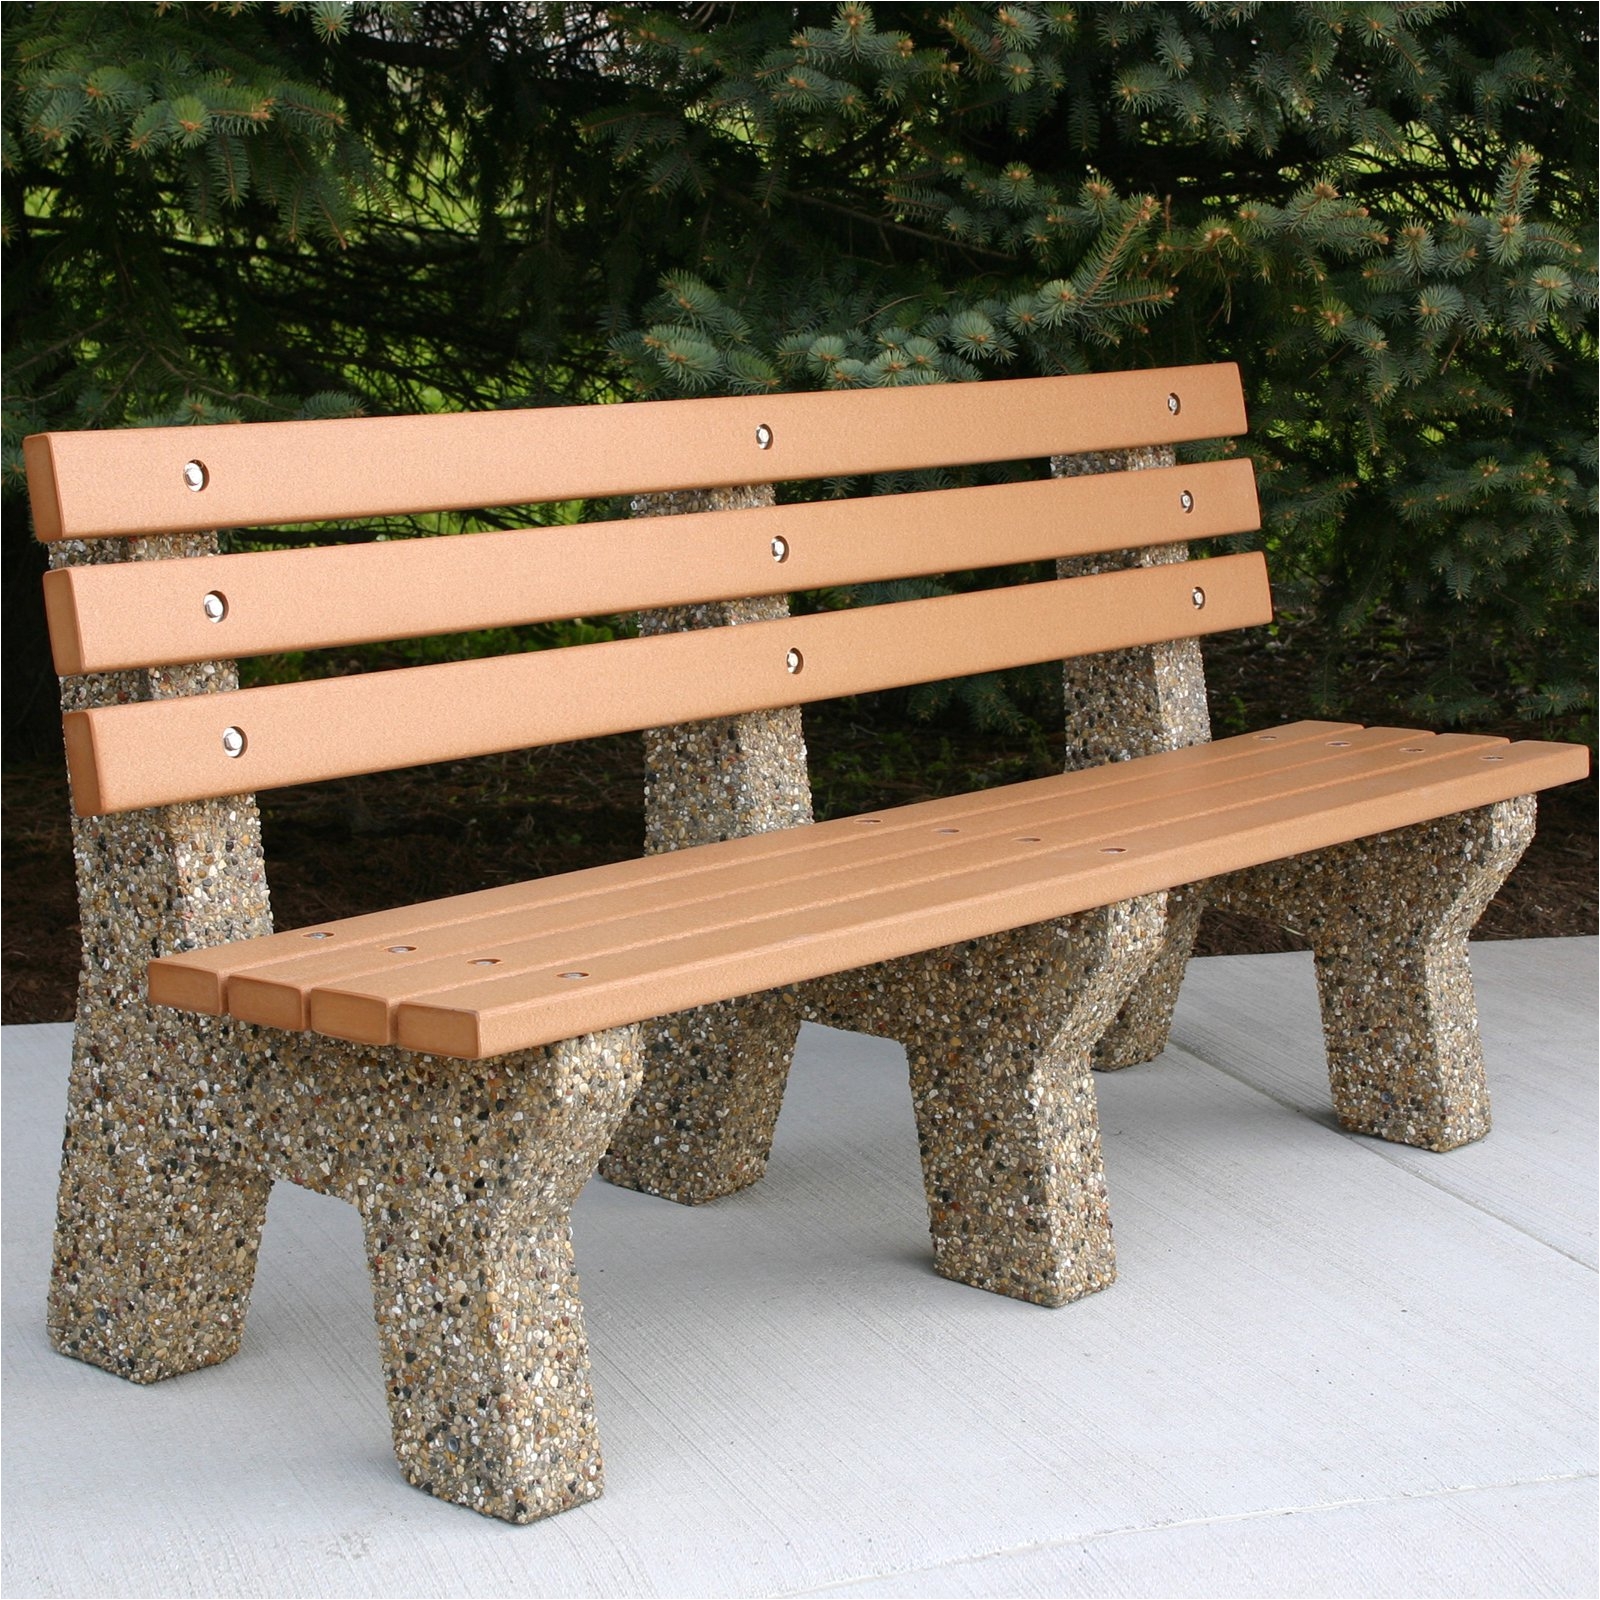 bench design cement garden benches concrete benches lowes amazing new natural cool classy amazing